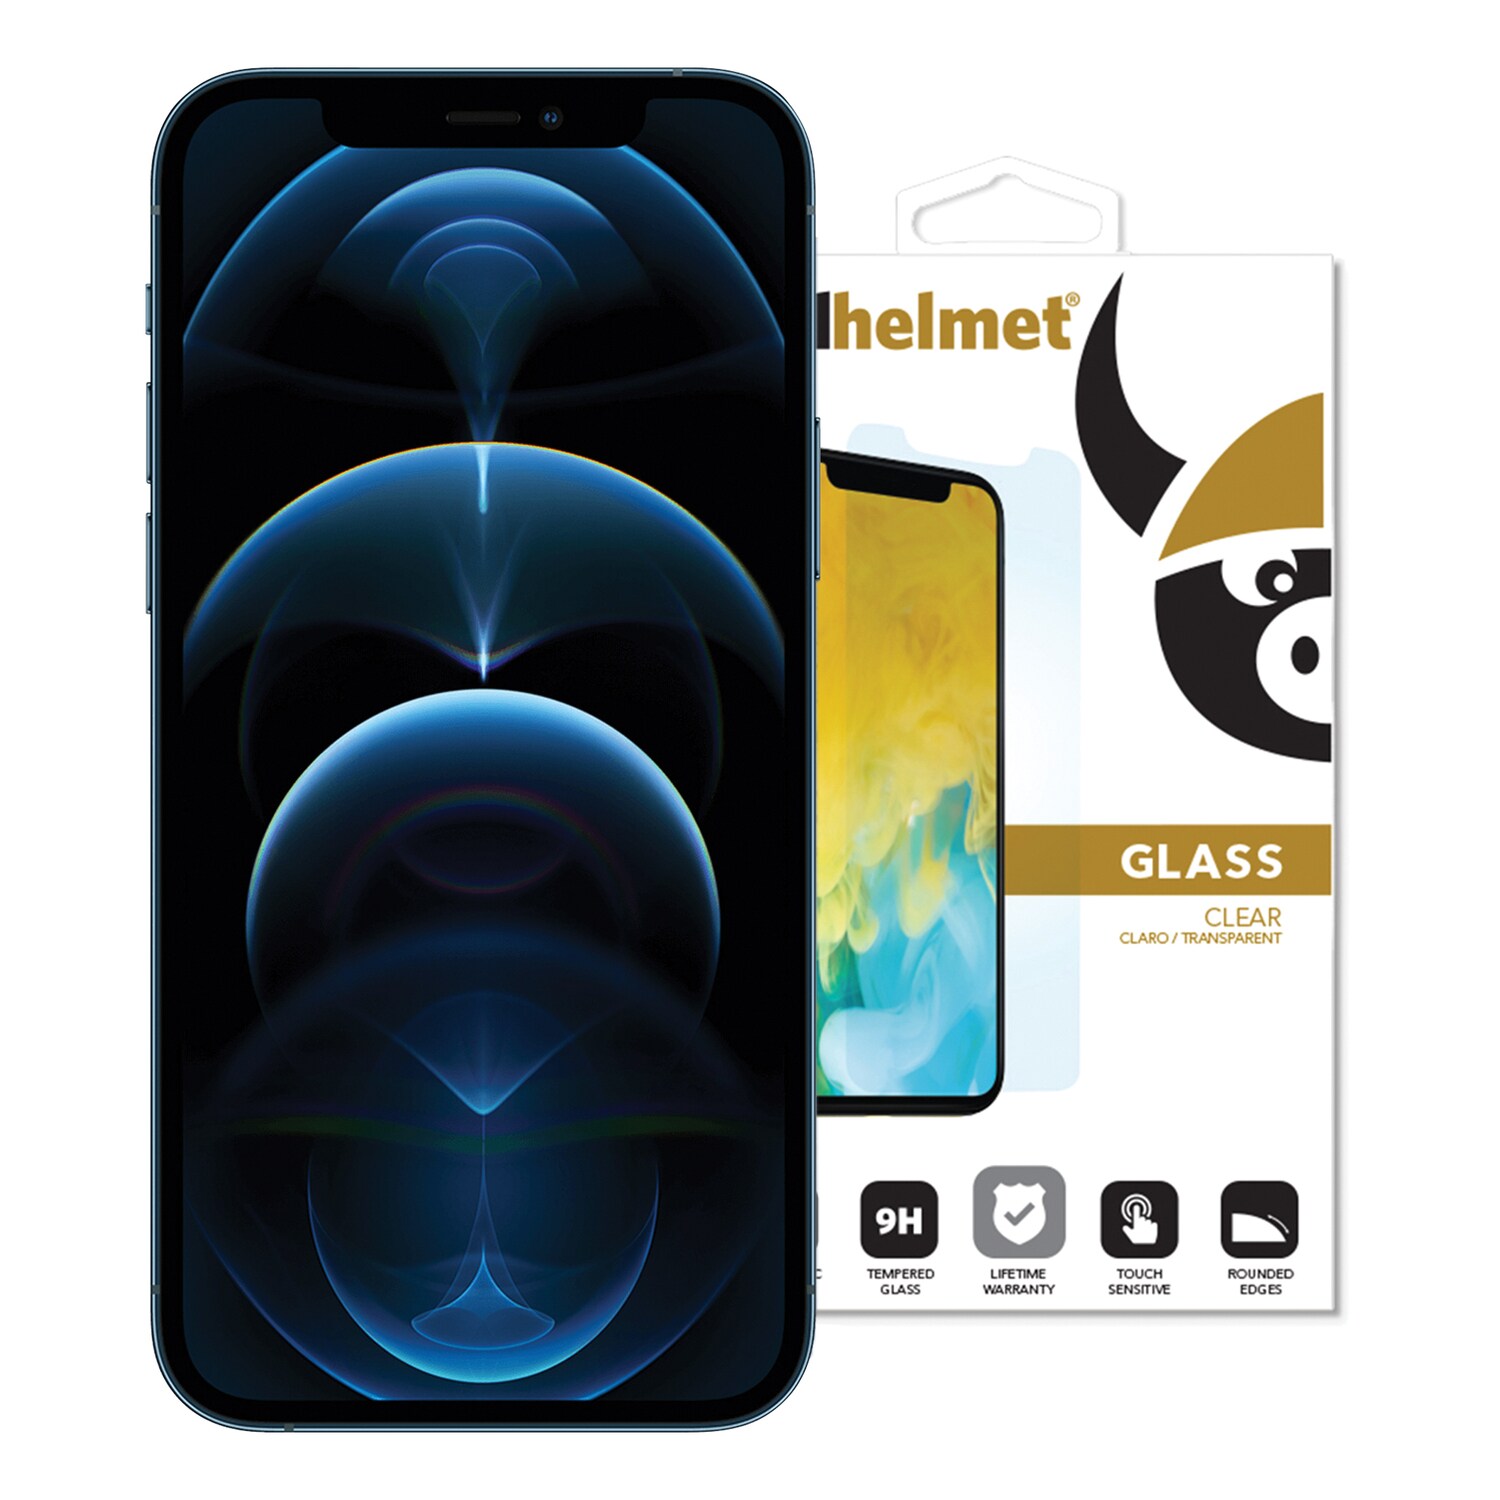 cellhelmet  Tempered Glass for iPhone 14, 13, and 13 Pro